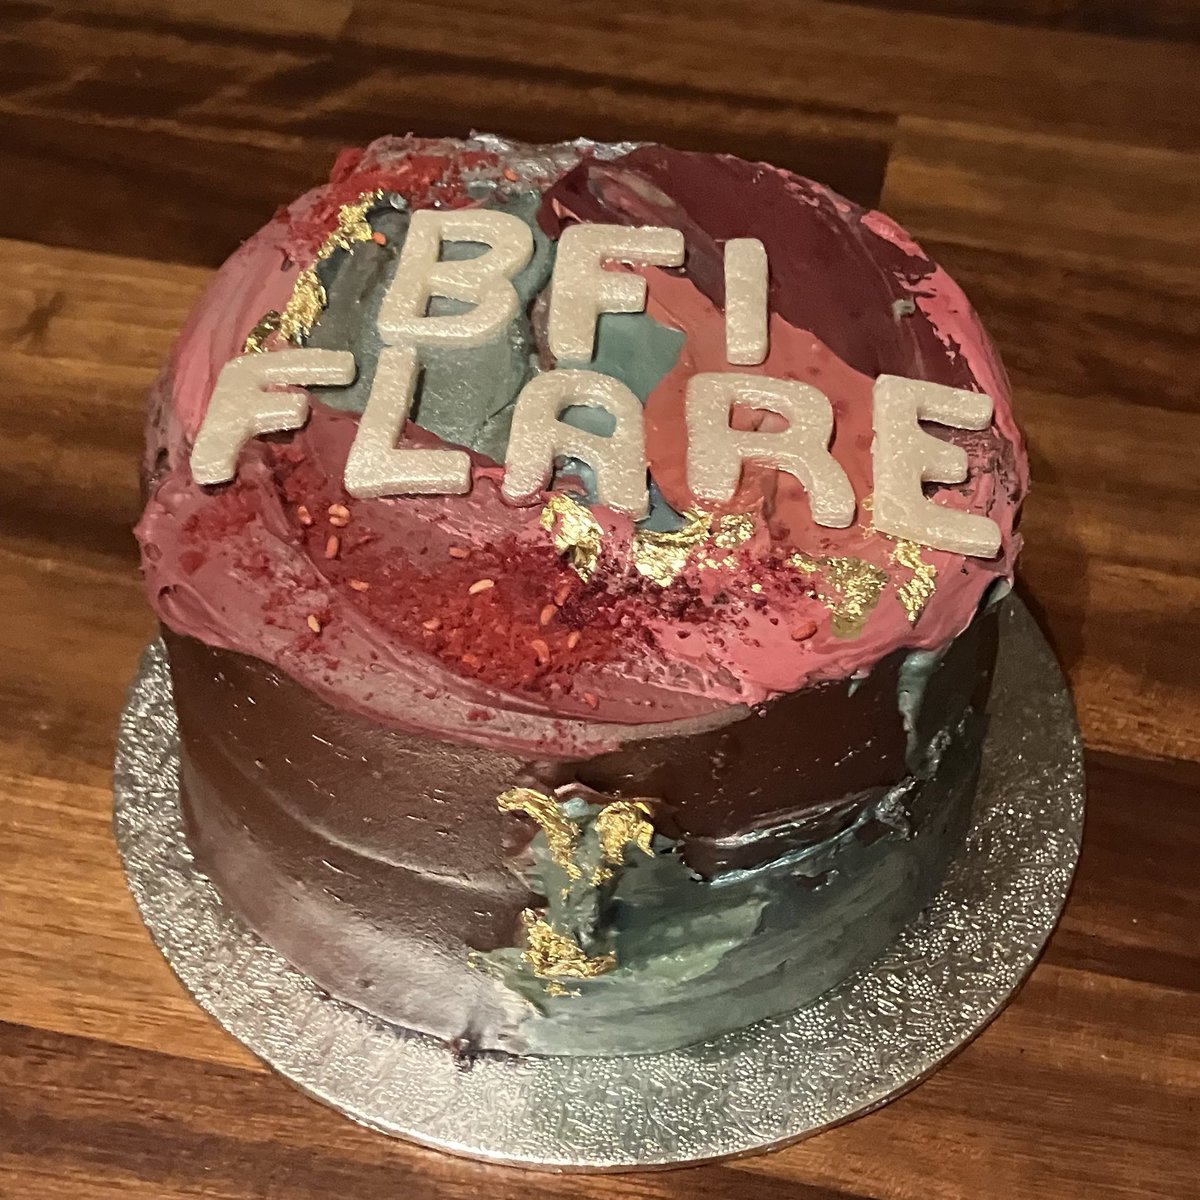 A treat to return home to find a gay vegan cake from @konditorcakes awaiting me to celebrate the programme announcement for @BFIFlare. You can peruse at your queer pleasure here: bfi.org.uk/flare.